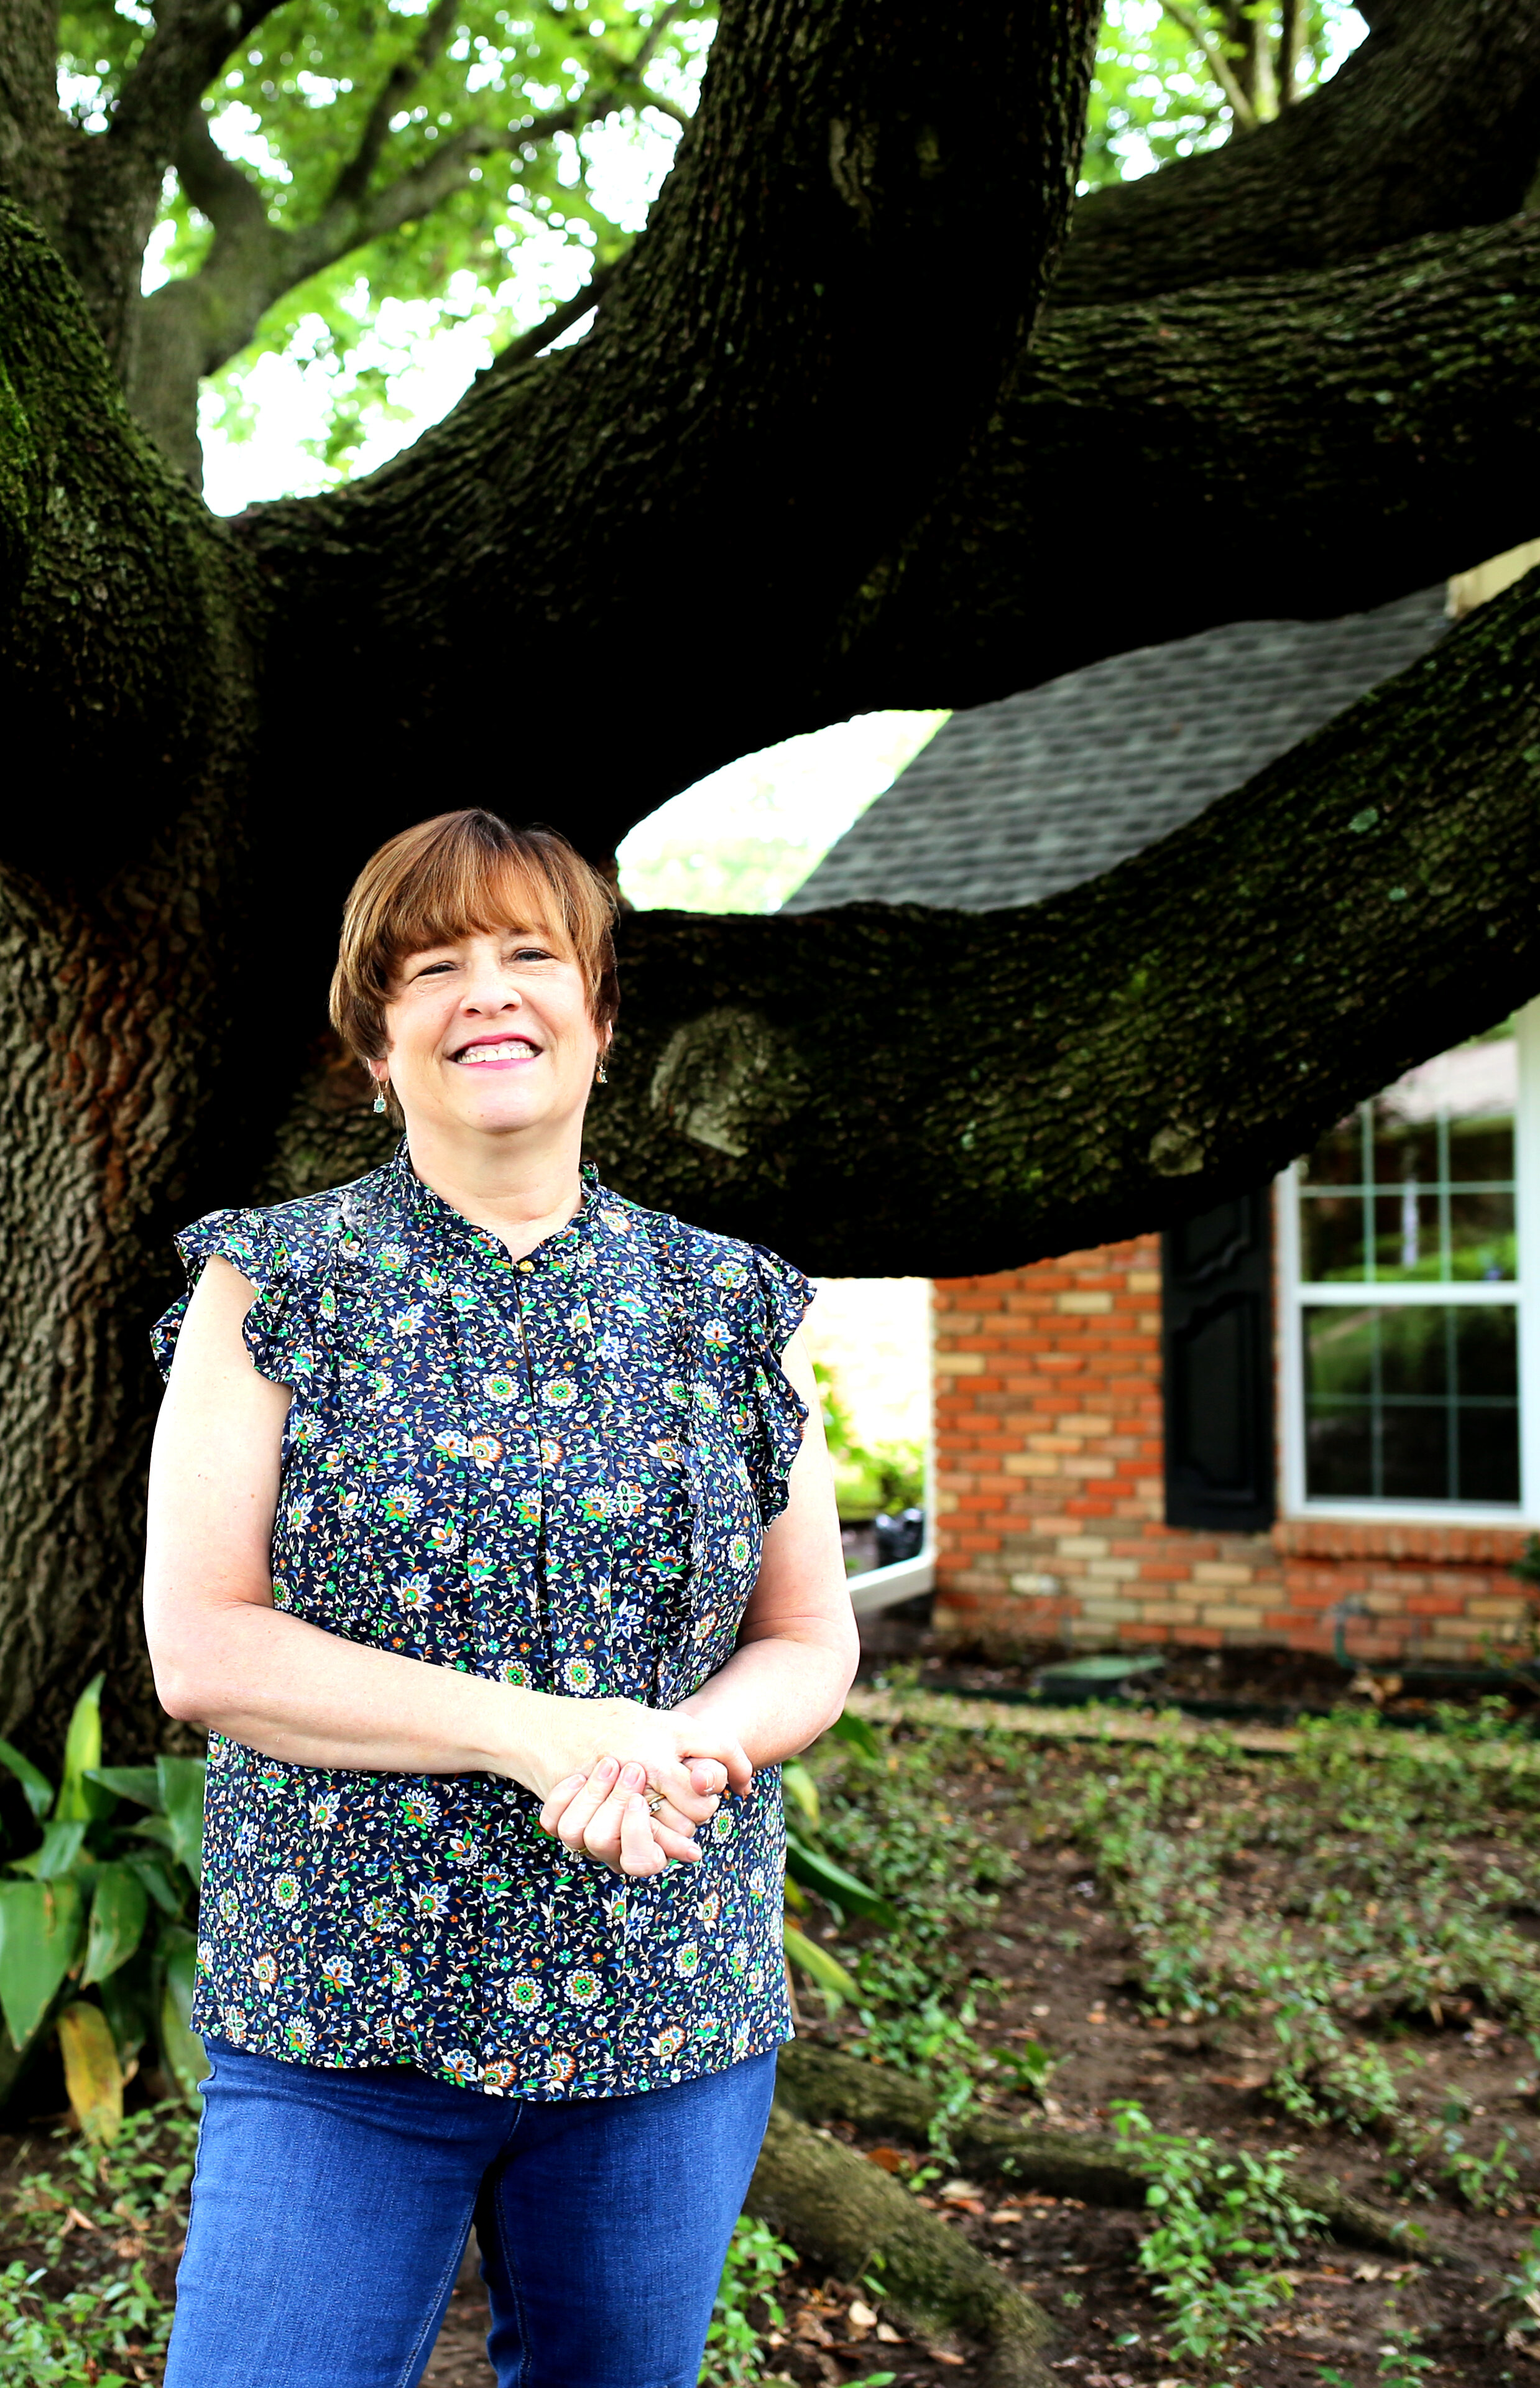 Bonnie Cook, at her home in North Dallas.